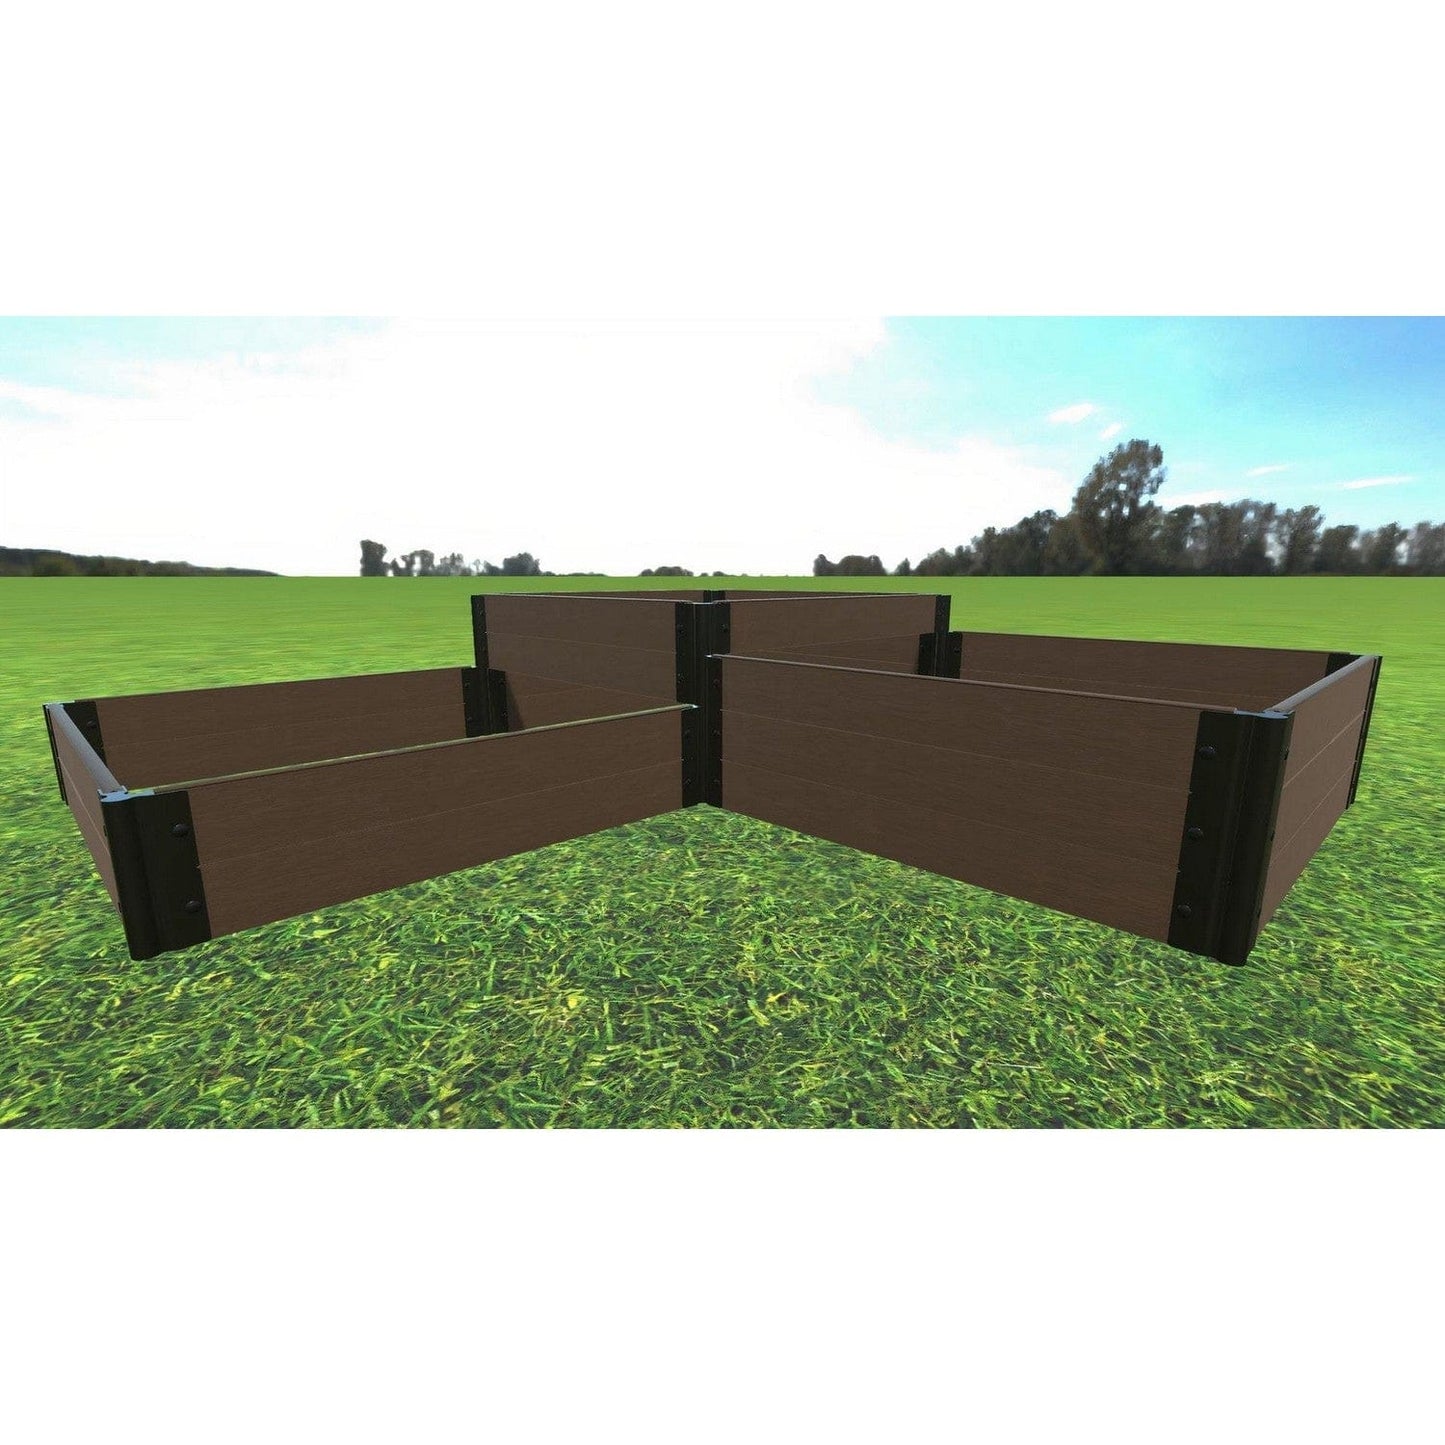 Frame It All Gardening Accessories Frame It All | Tool-Free Fort Knox Straight Corner Raised Garden Bed (Tri-Level) 8' X 8' X 22" - Uptown Brown- 1" Profile 800002023